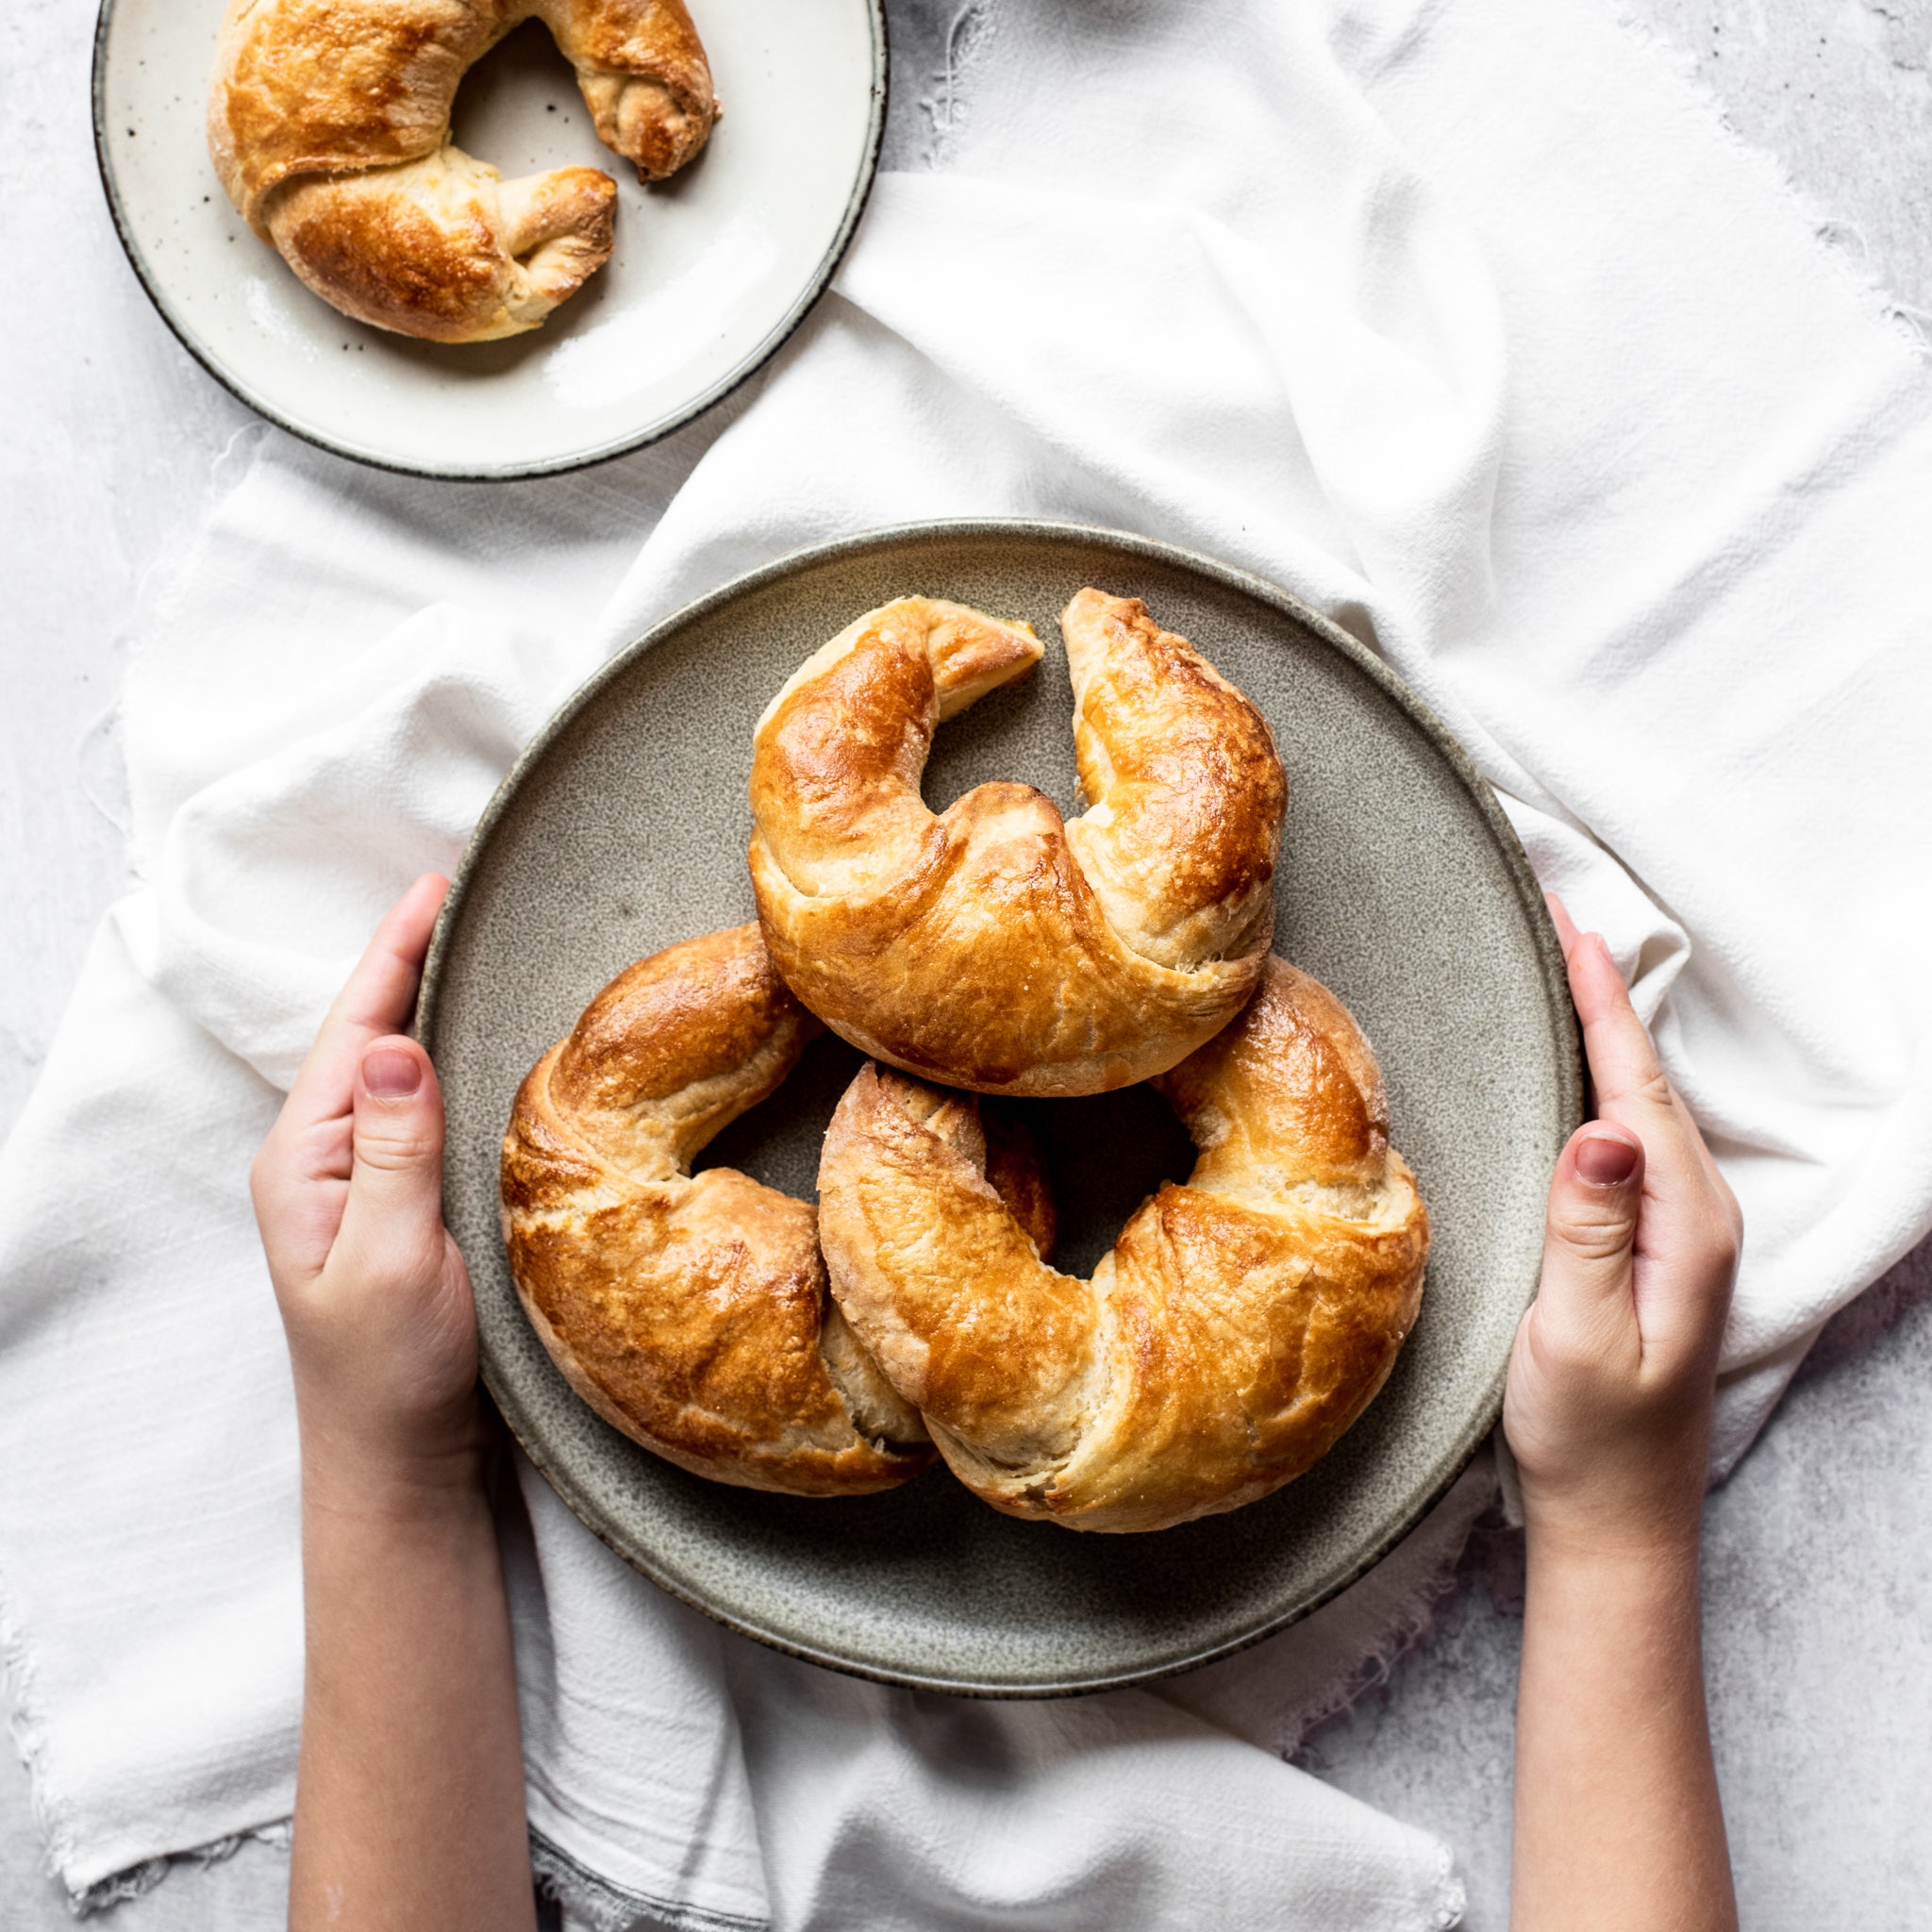 Plate of 3 croissants with two hands holding each side